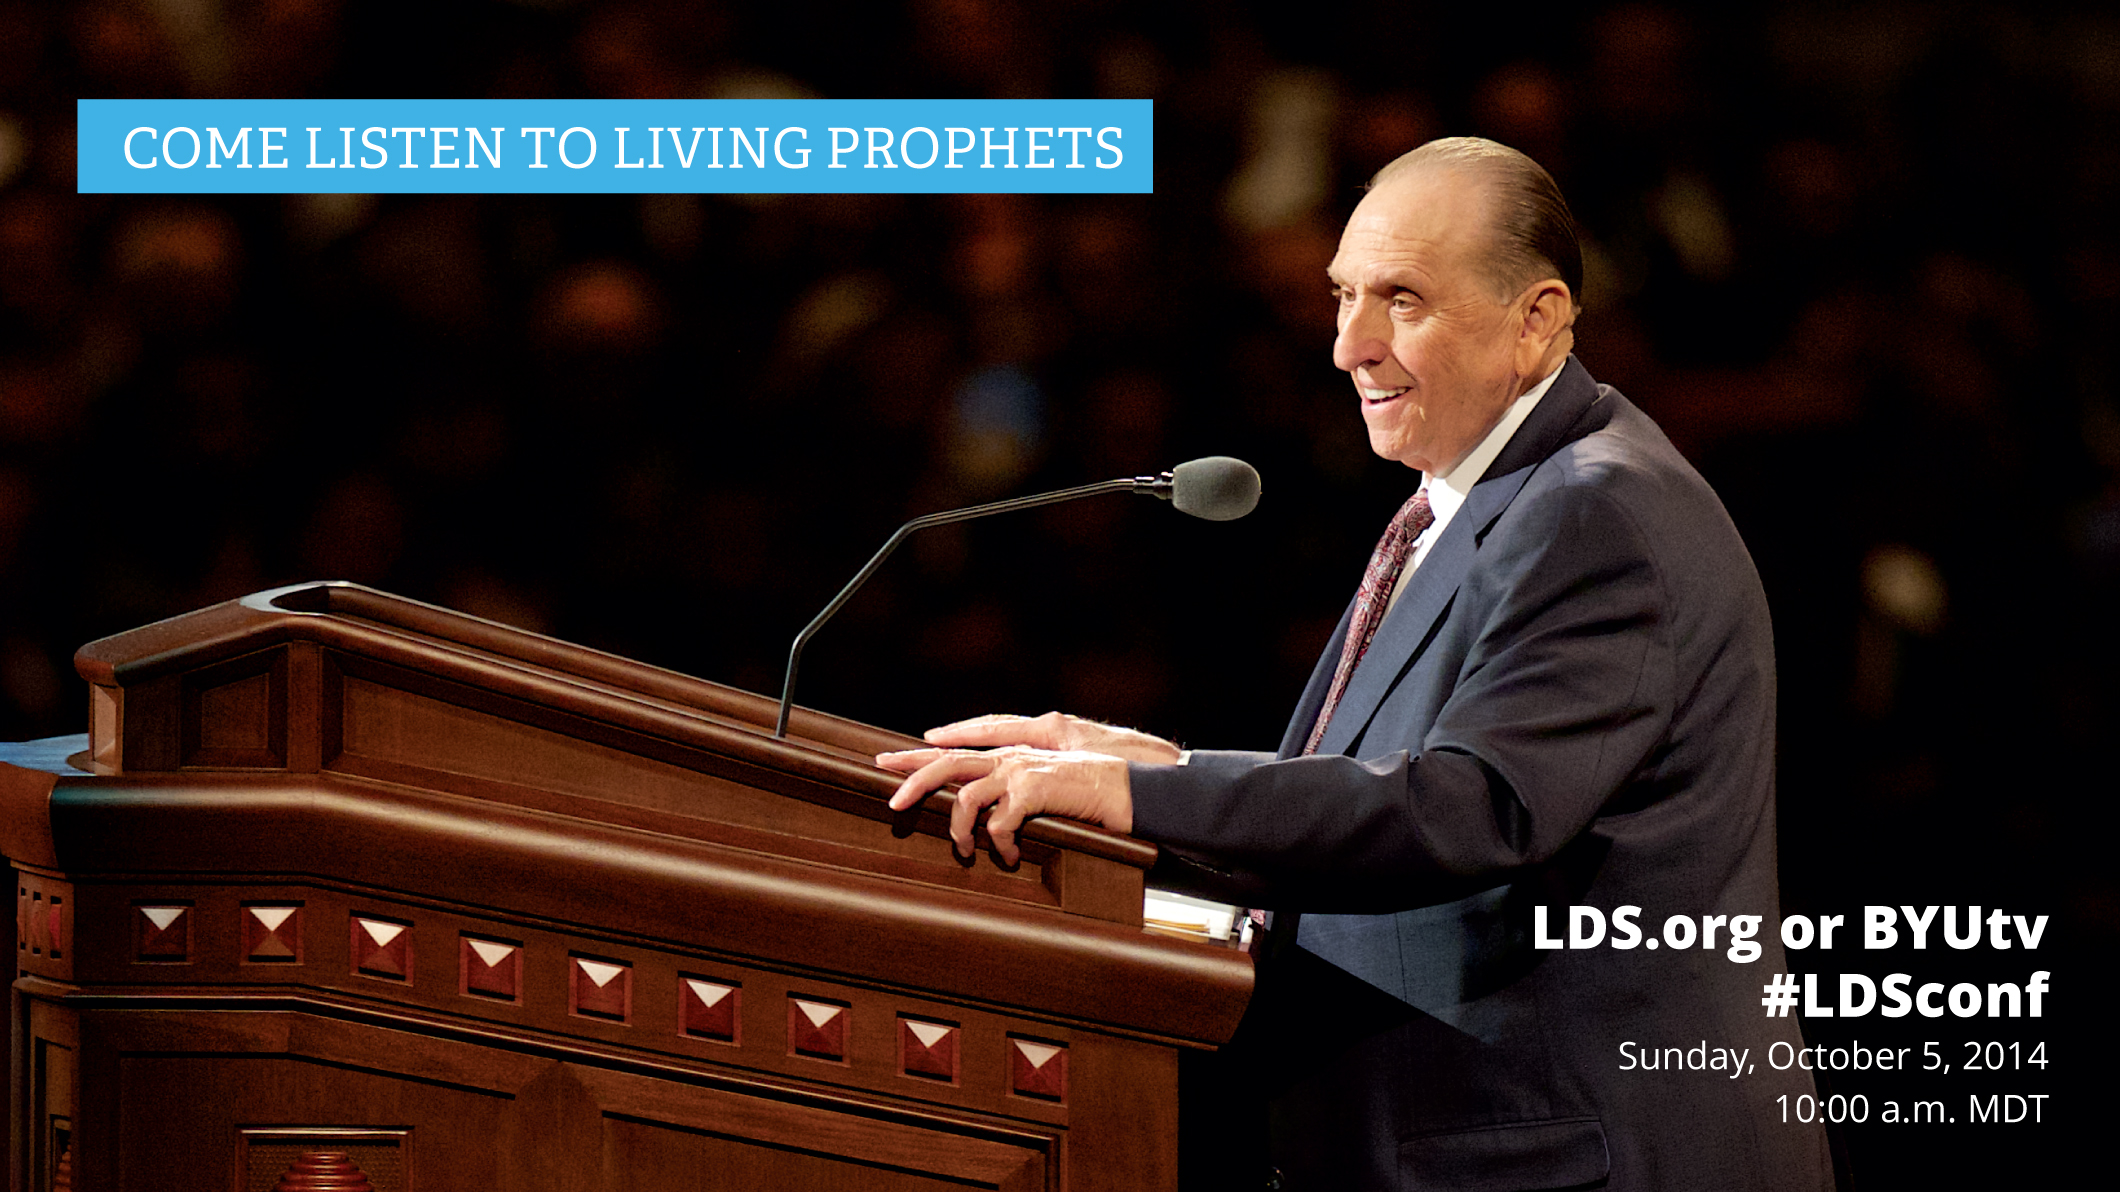 https://www.lds.org/bc/content/shared/english/conference/google+gc-large.jpg?lang=eng